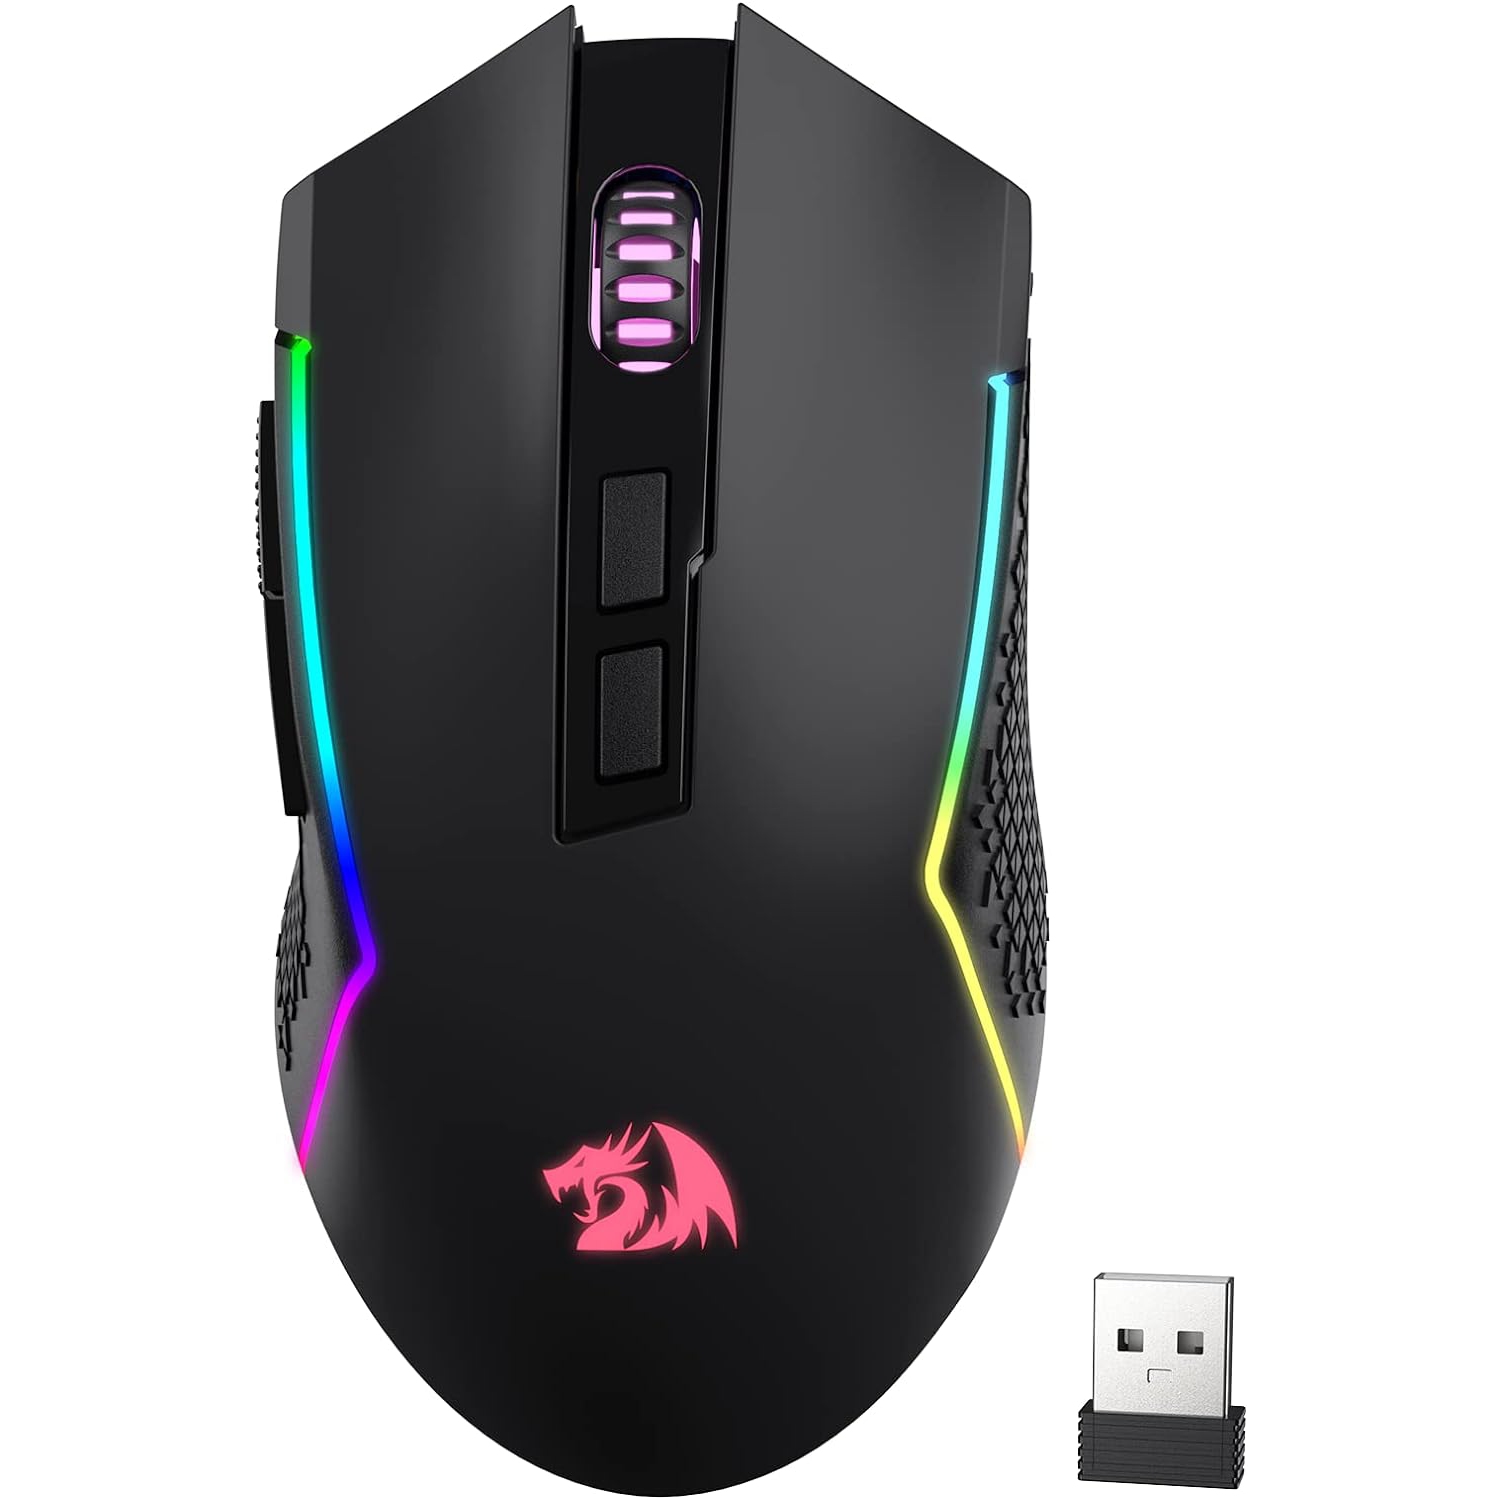 Redragon M693 Wireless Gaming Mouse, 8000 DPI Wired/Wireless Gamer Mouse w/ 3-Mode Connection, BT & 2.4G Wireless, 7 Macro Buttons, Durable Power Capacity for PC/Mac/Laptop